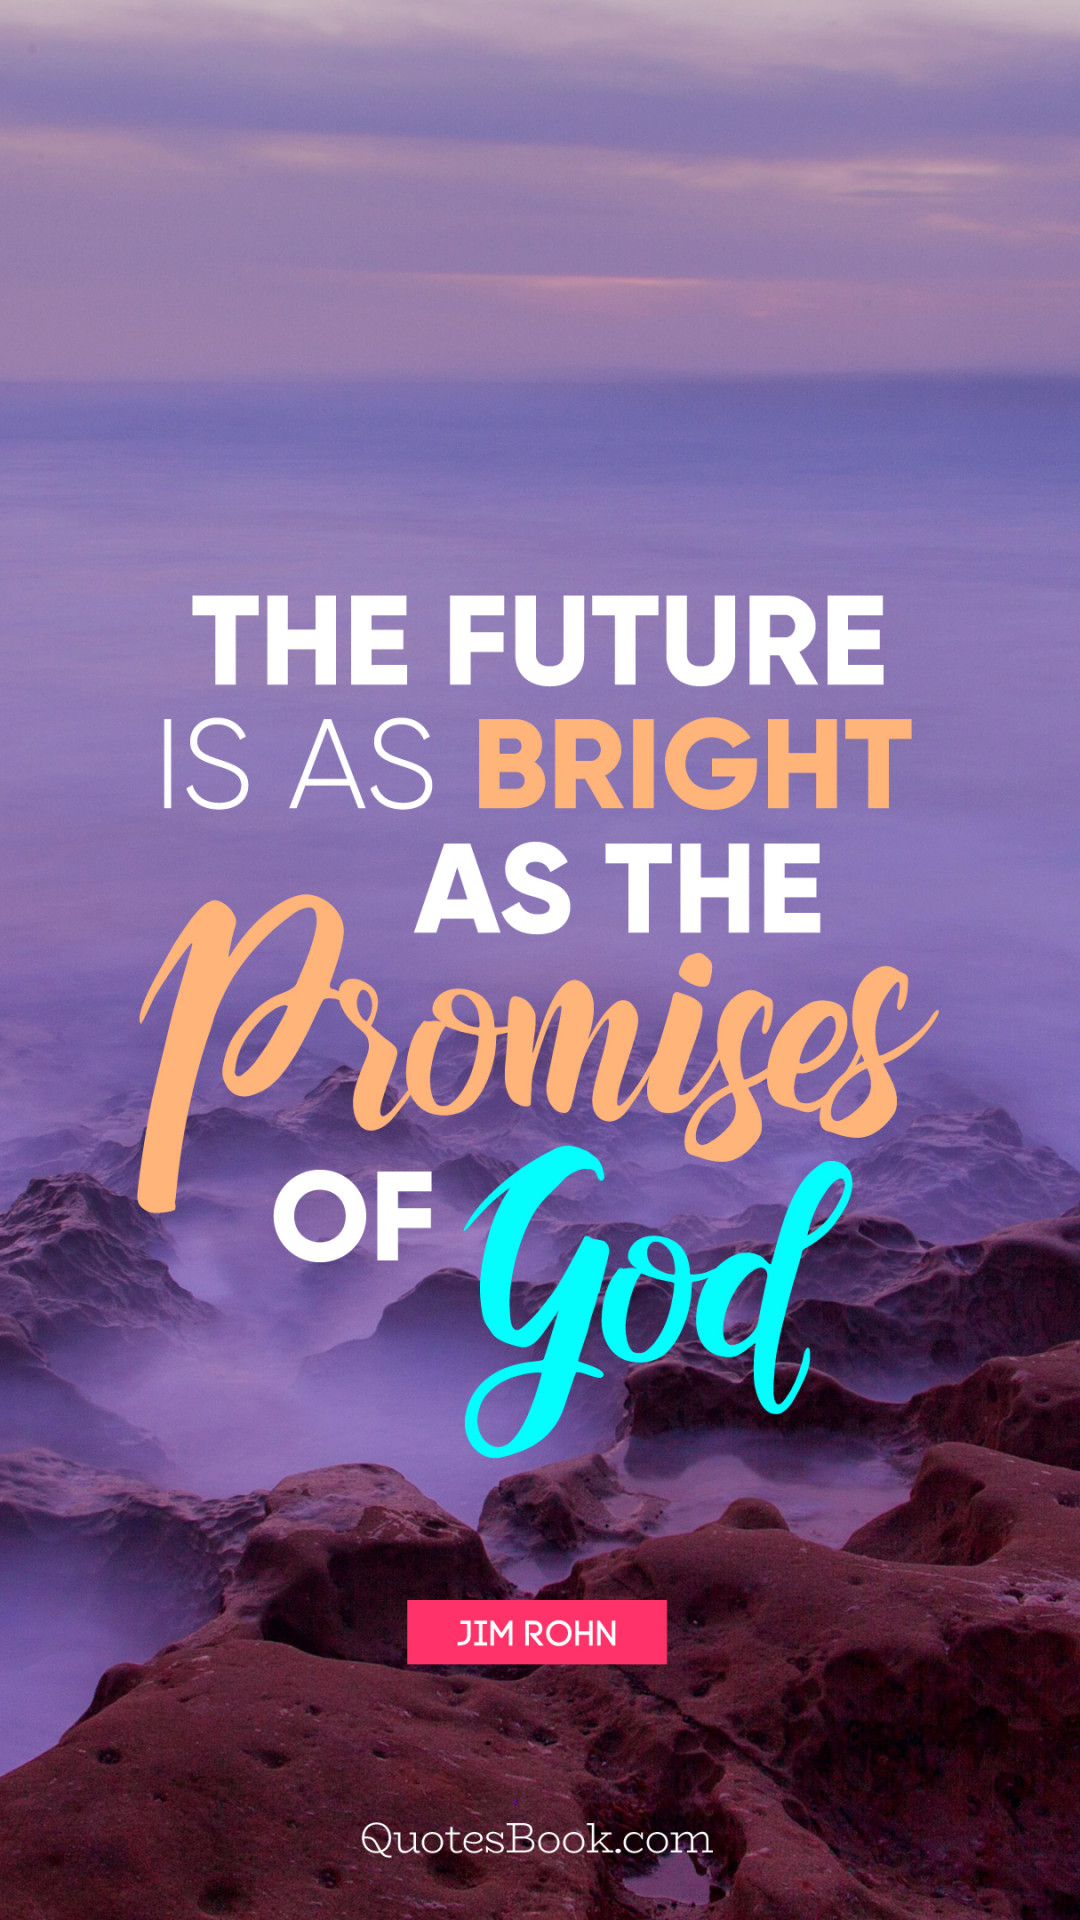 the future is as bright as the promises of god 1080x1920 2451